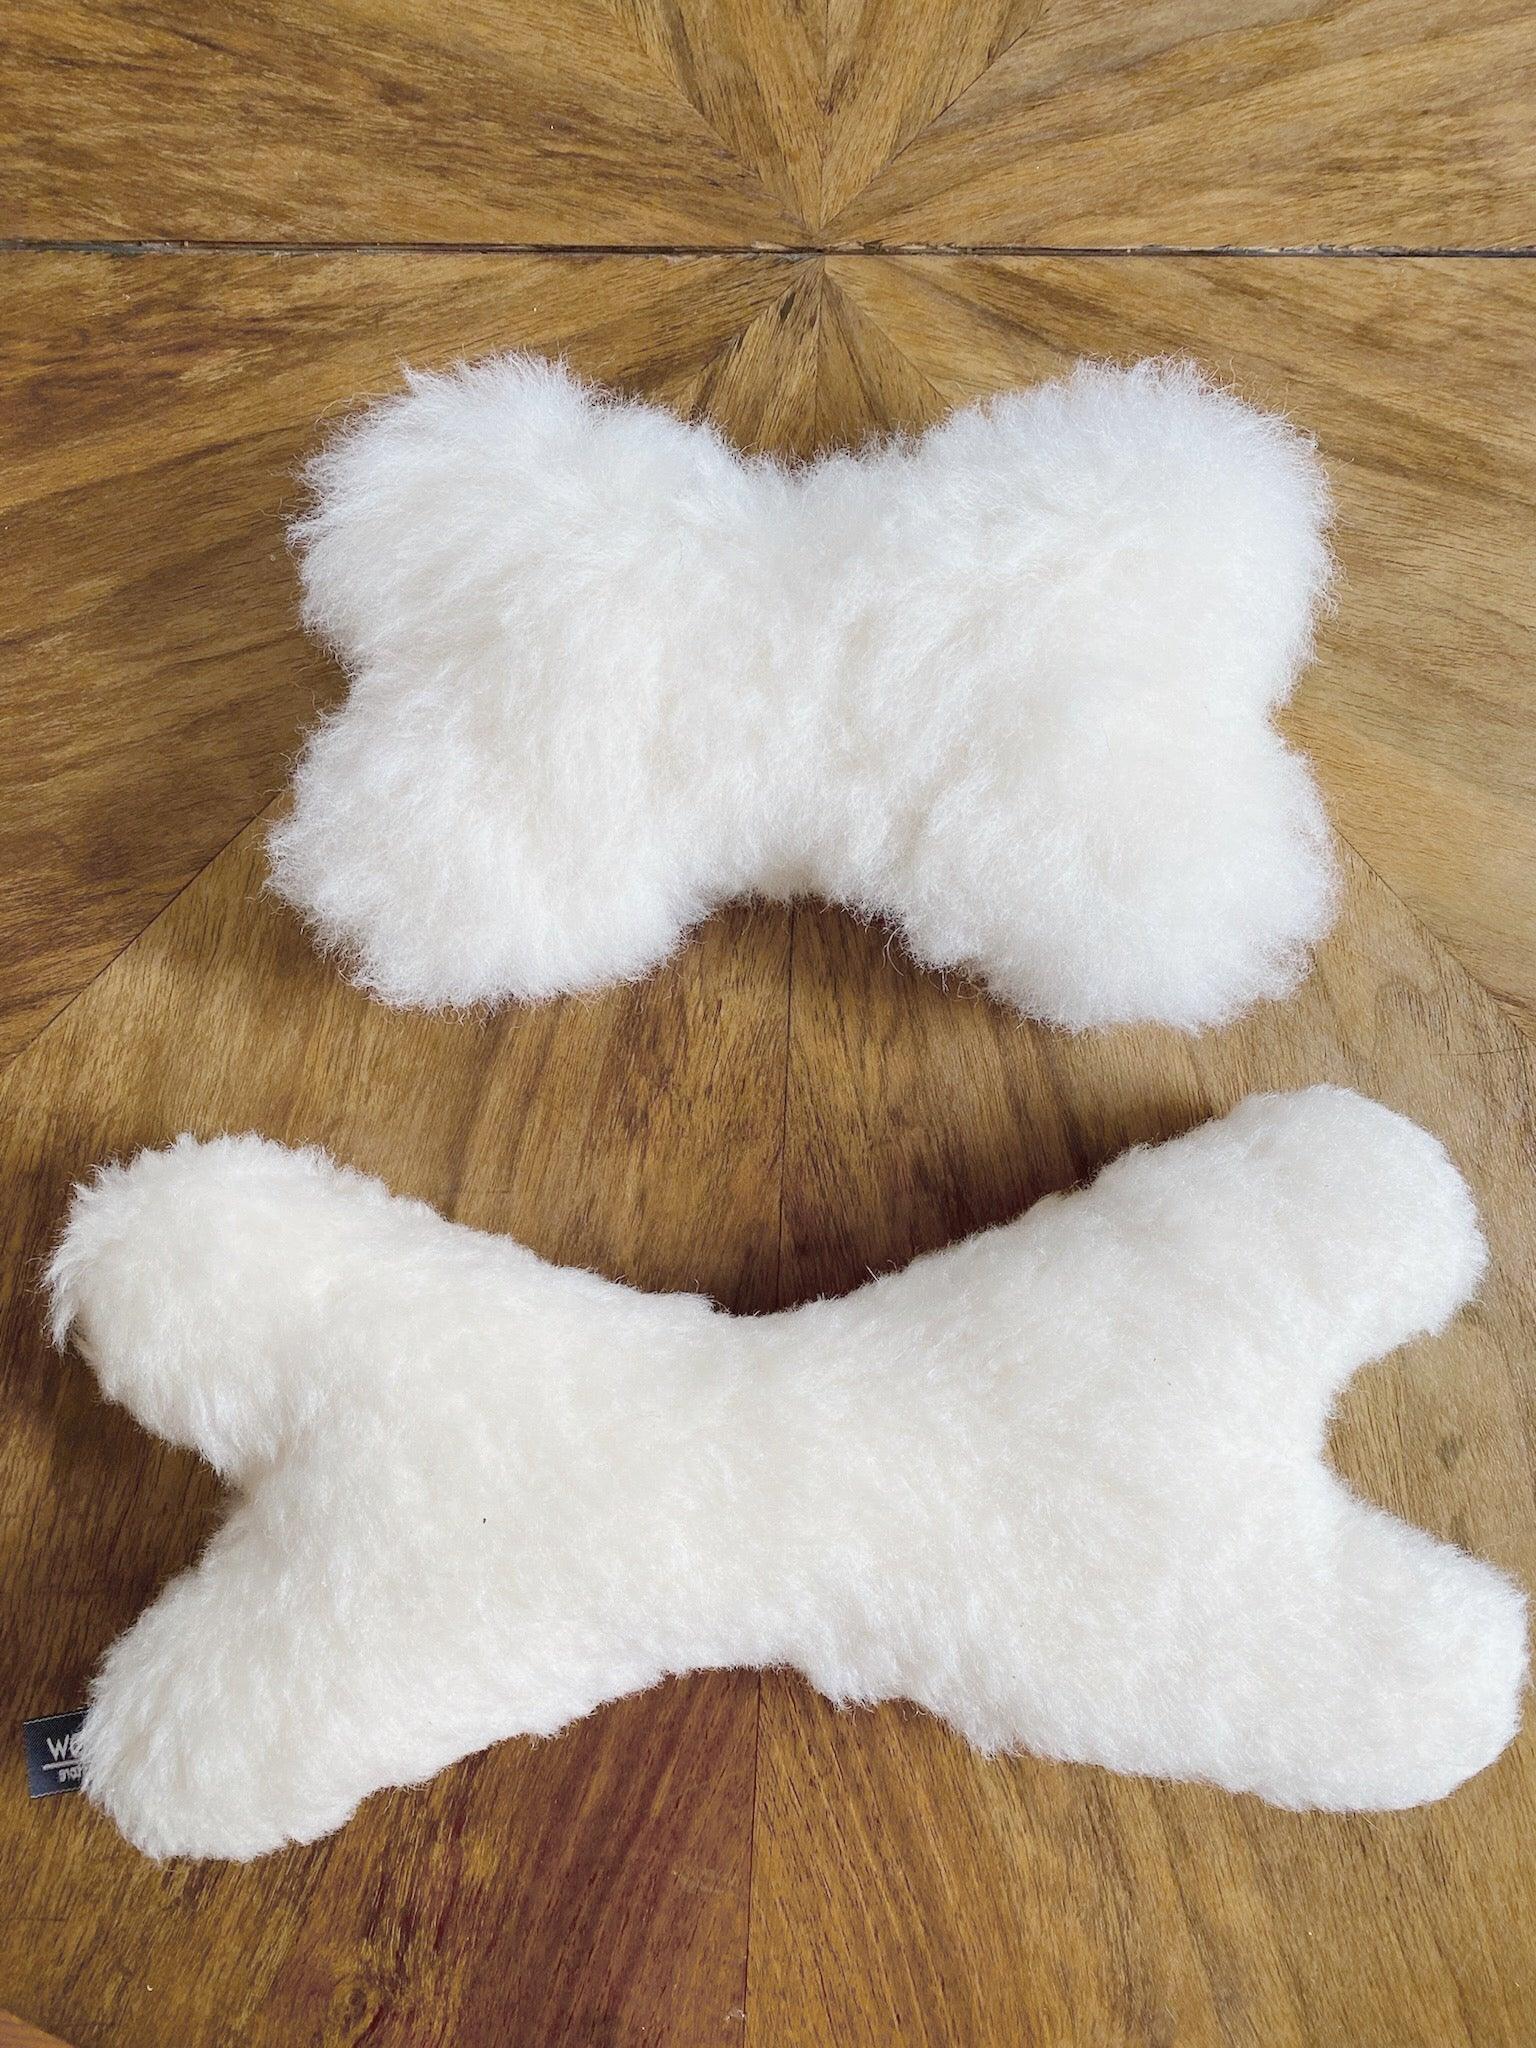 Two Natural Sheepskin Dog Toy Bones sit on a wooden table from Mellow Pet Store.